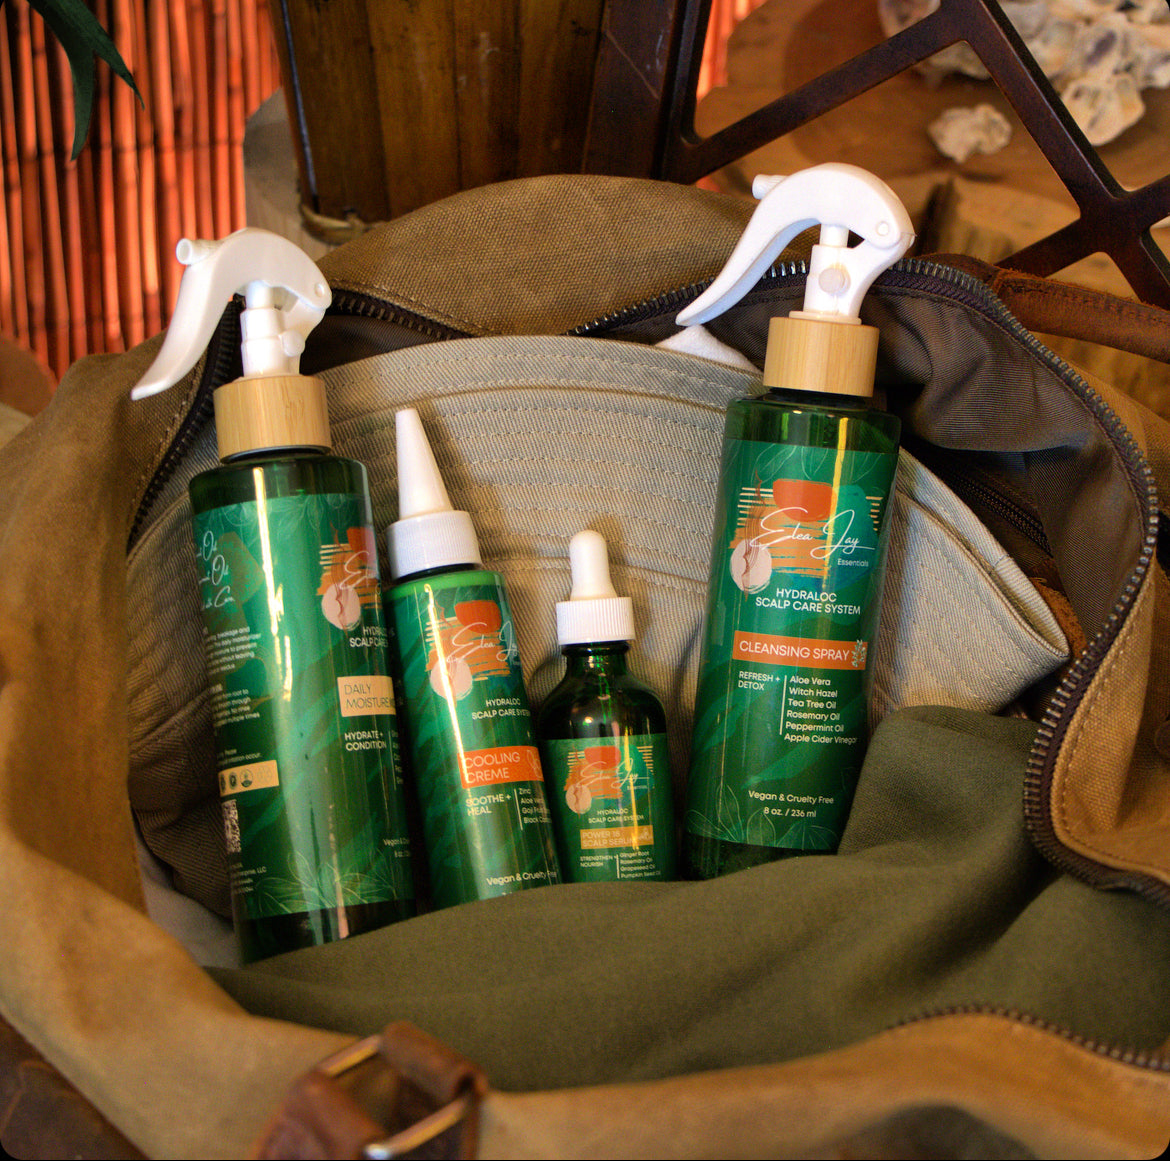 The Hydraloc Scalp Care System bundled in a travel bag.